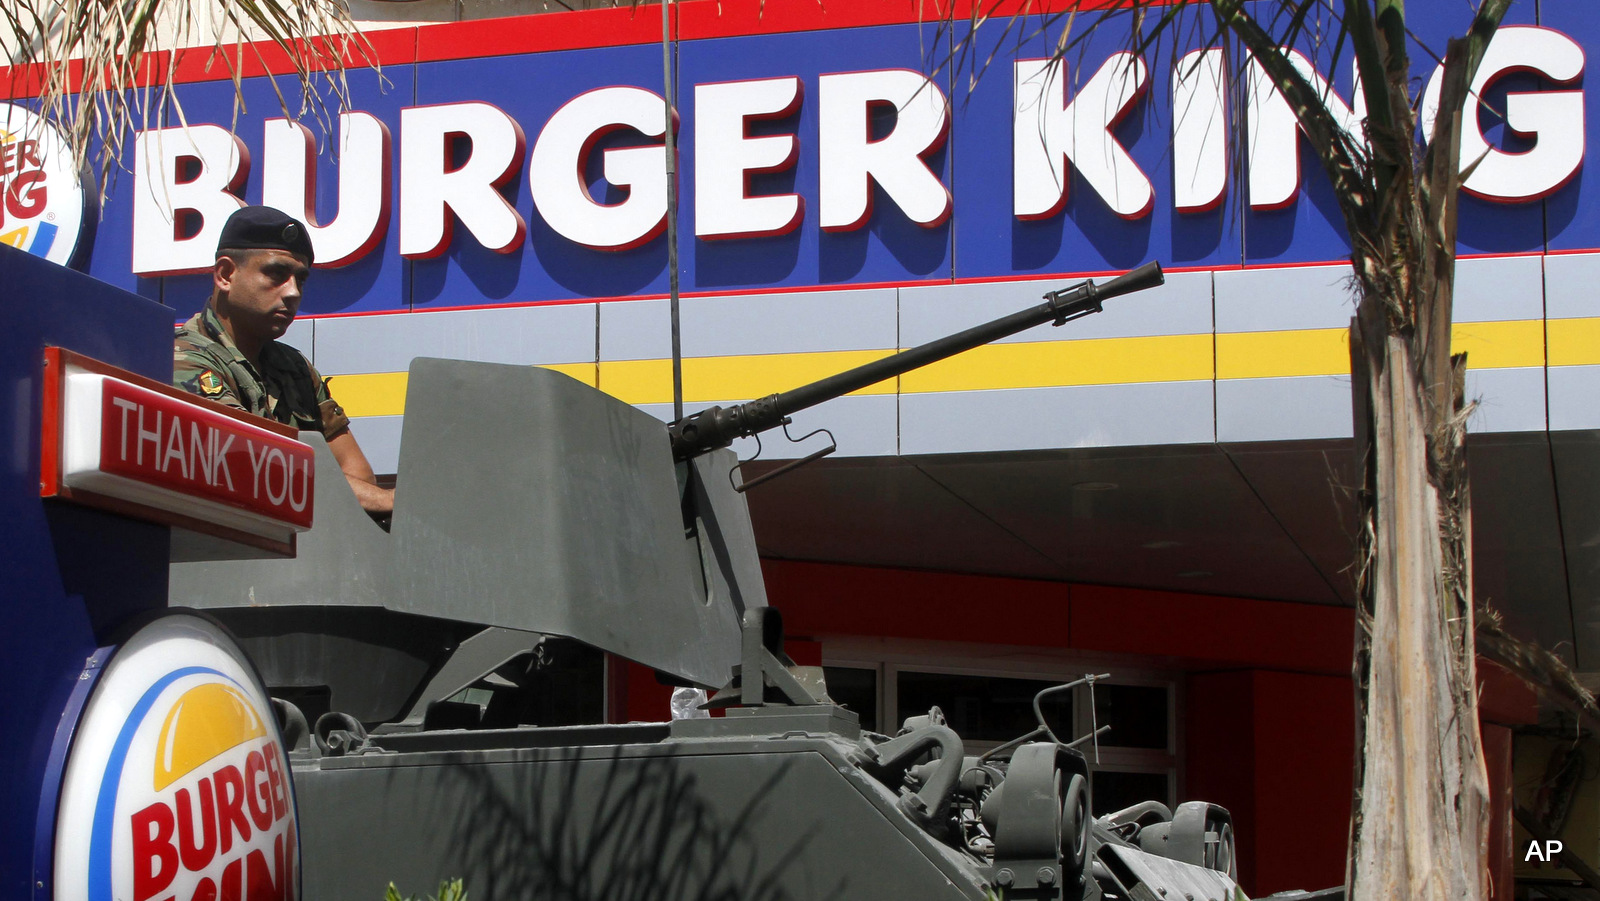 A Lebanese army soldier sits on his armored personnel carrier, as he stands guard outside the Burger King as part of stepped up security measures, in the southern port city of Sidon, Lebanon, Sept. 15, 2012. (AP/Mohammed Zaatari)